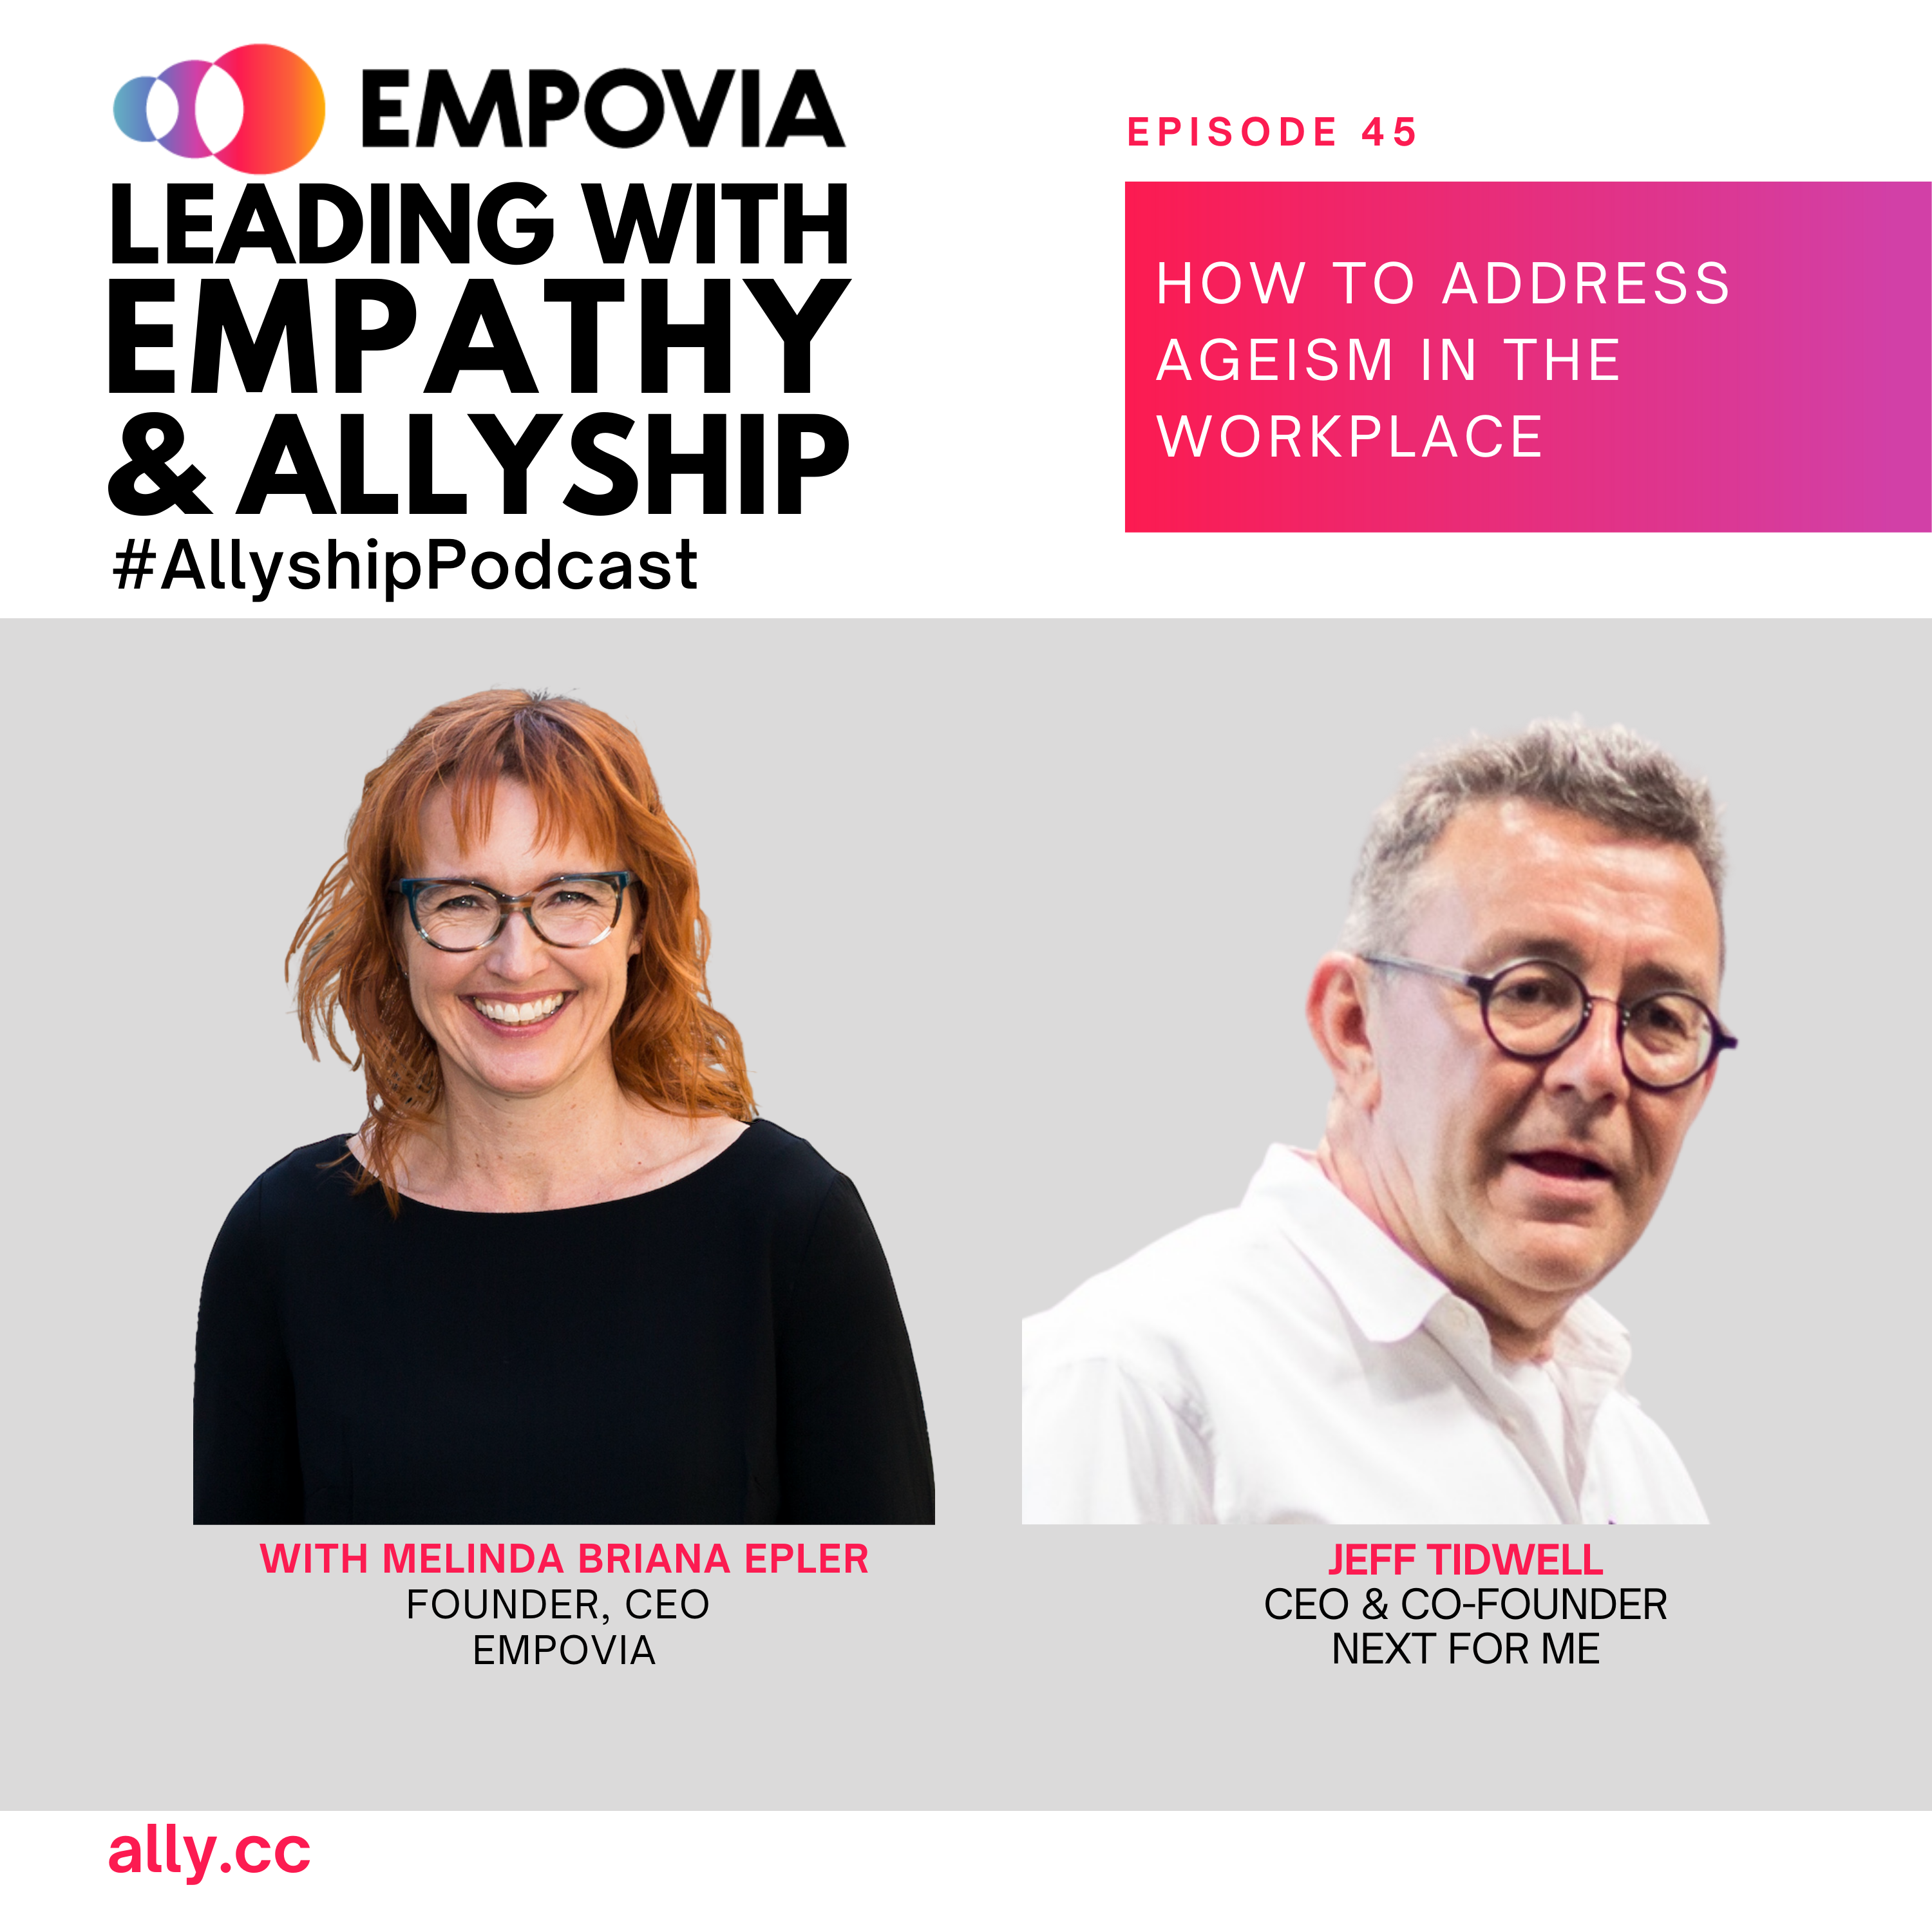 Leading With Empathy & Allyship promo with the Empovia logo and photos of host Melinda Briana Epler, a White woman with red hair and glasses, and Jeff Tidwell, a White man with short hair, glasses, and white shirt.